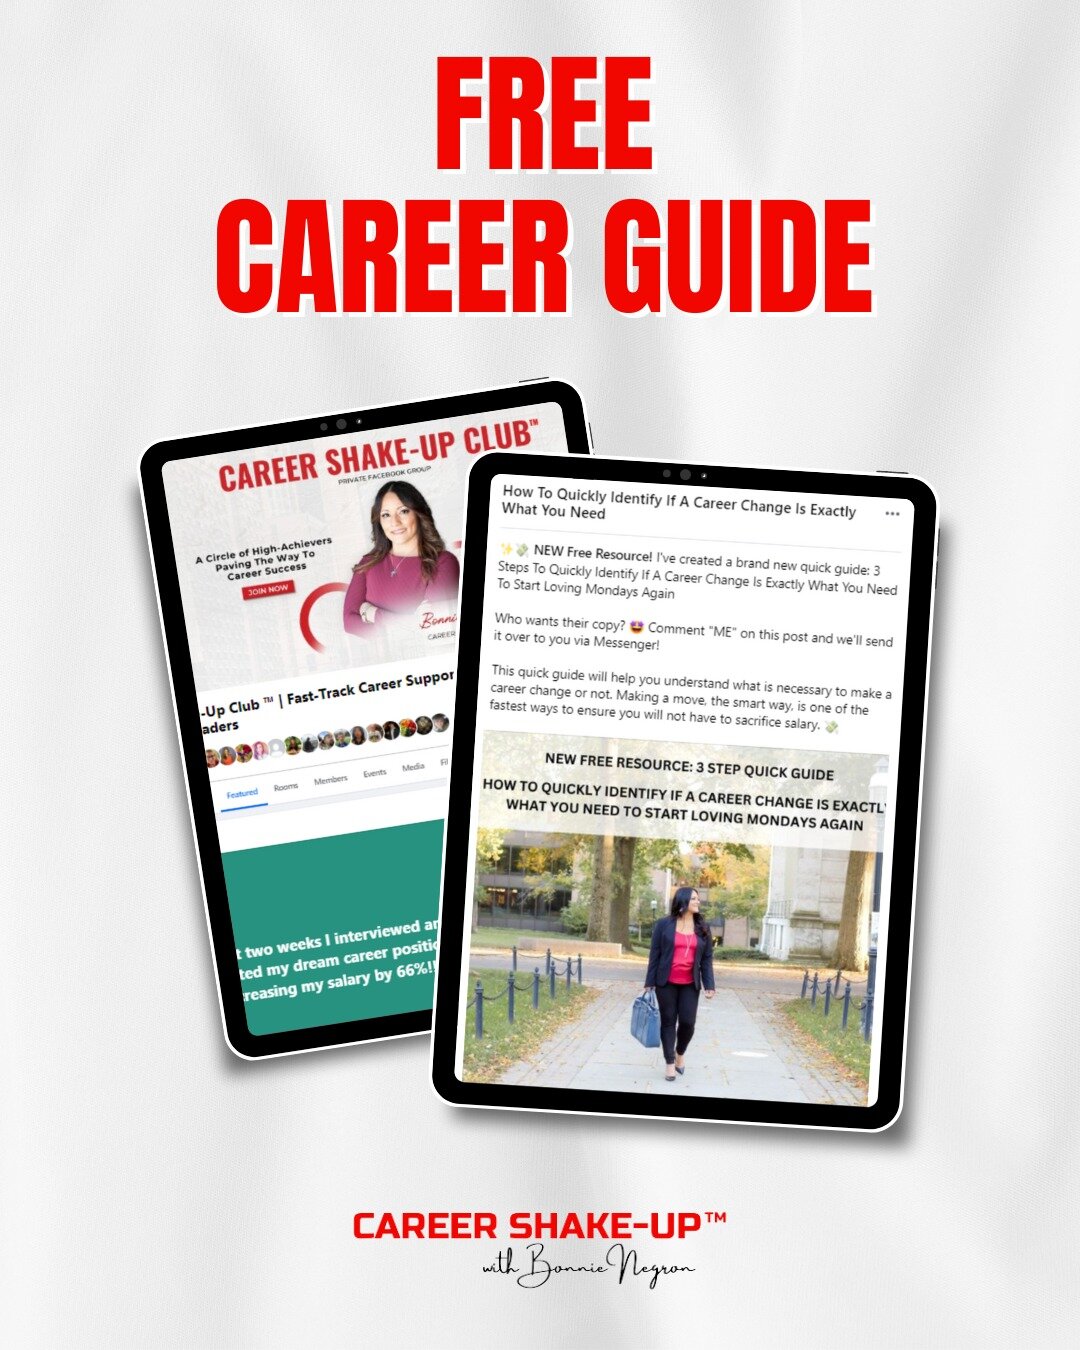 Job change or career change &ndash; which path holds the key to your ultimate happiness and success?

ultimate happiness and success? Create a PLAN based on that.

If you're struggling with the decision of job vs. career change or need assistance cre